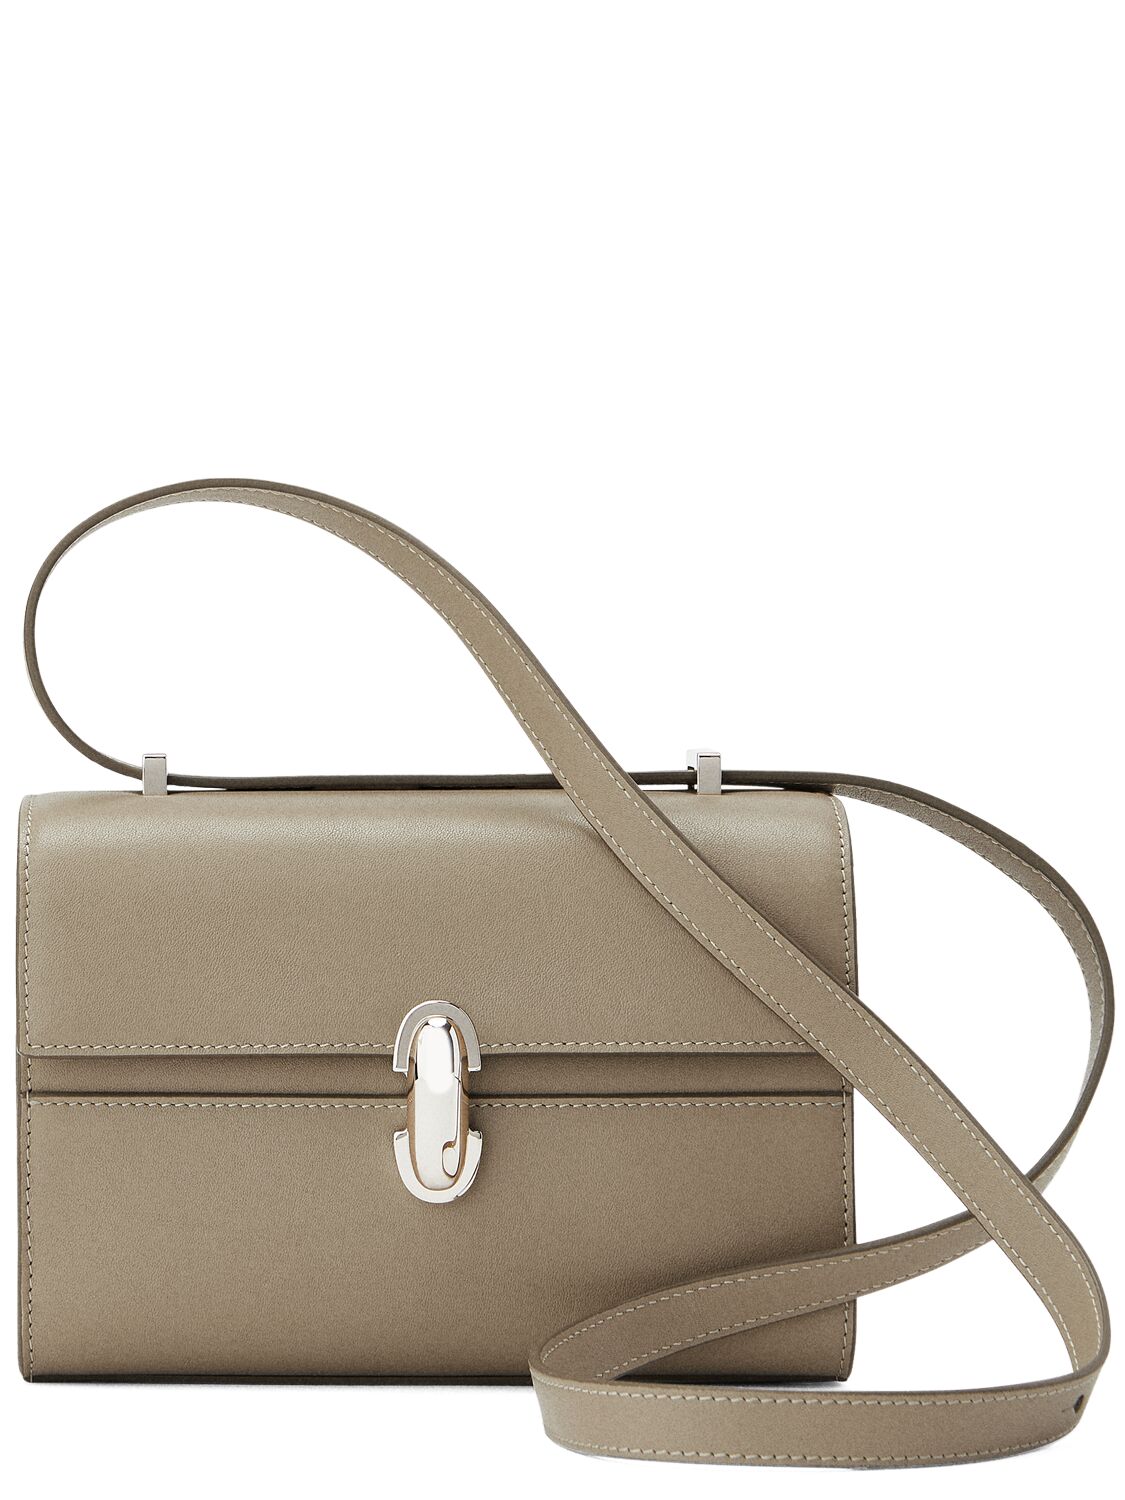 Savette The Symmetry 19 Leather Shoulder Bag In Clay